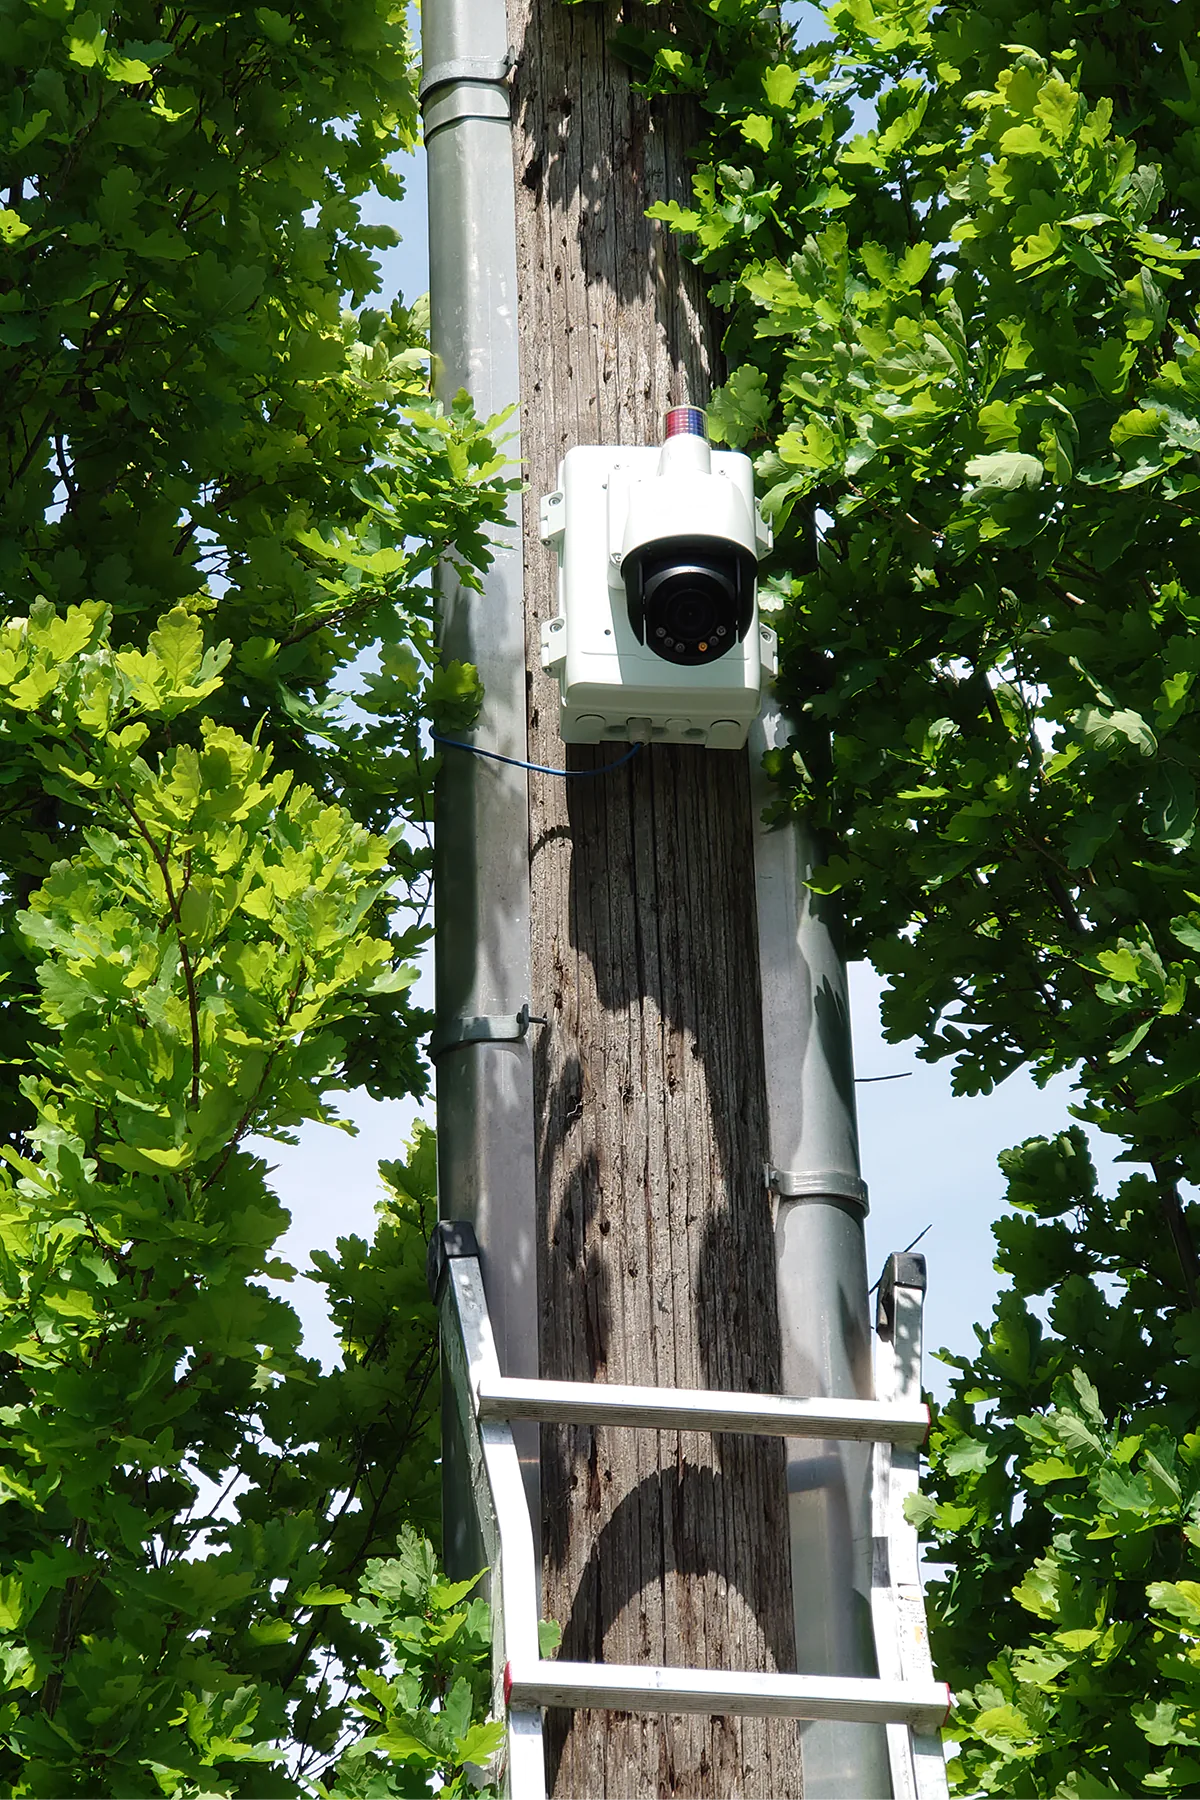 Uniview Camera 2MP Active Deterrence PTZ Installed Outdoors on Tree Pole with JB12